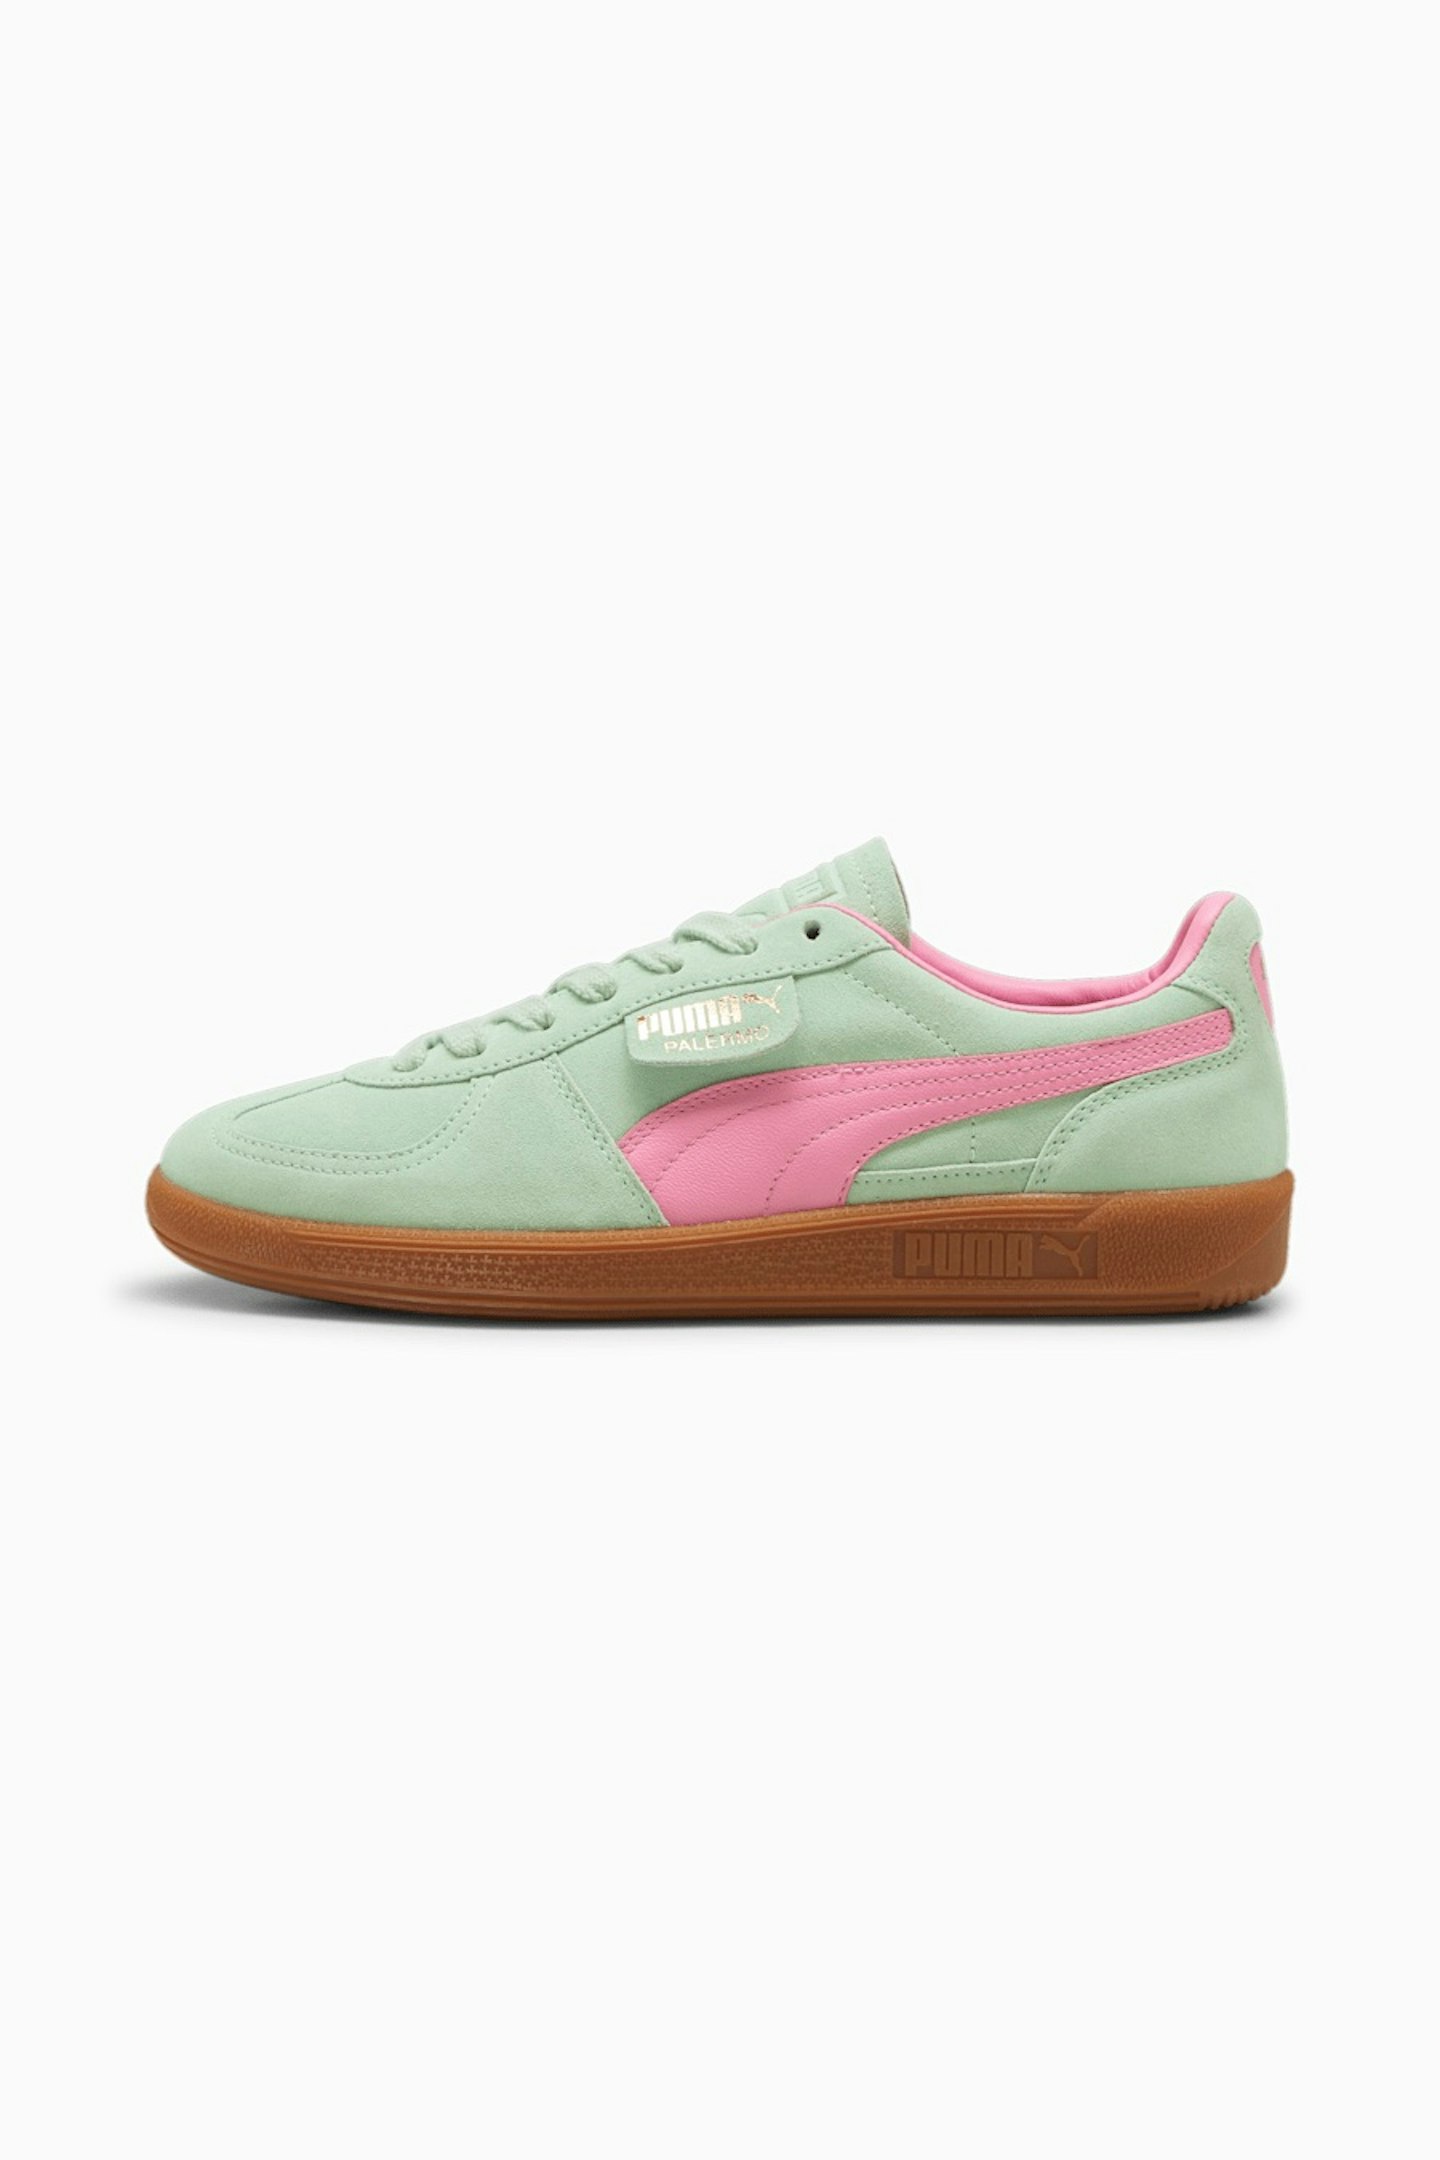 Puma Green and Pink Palermo Trainers